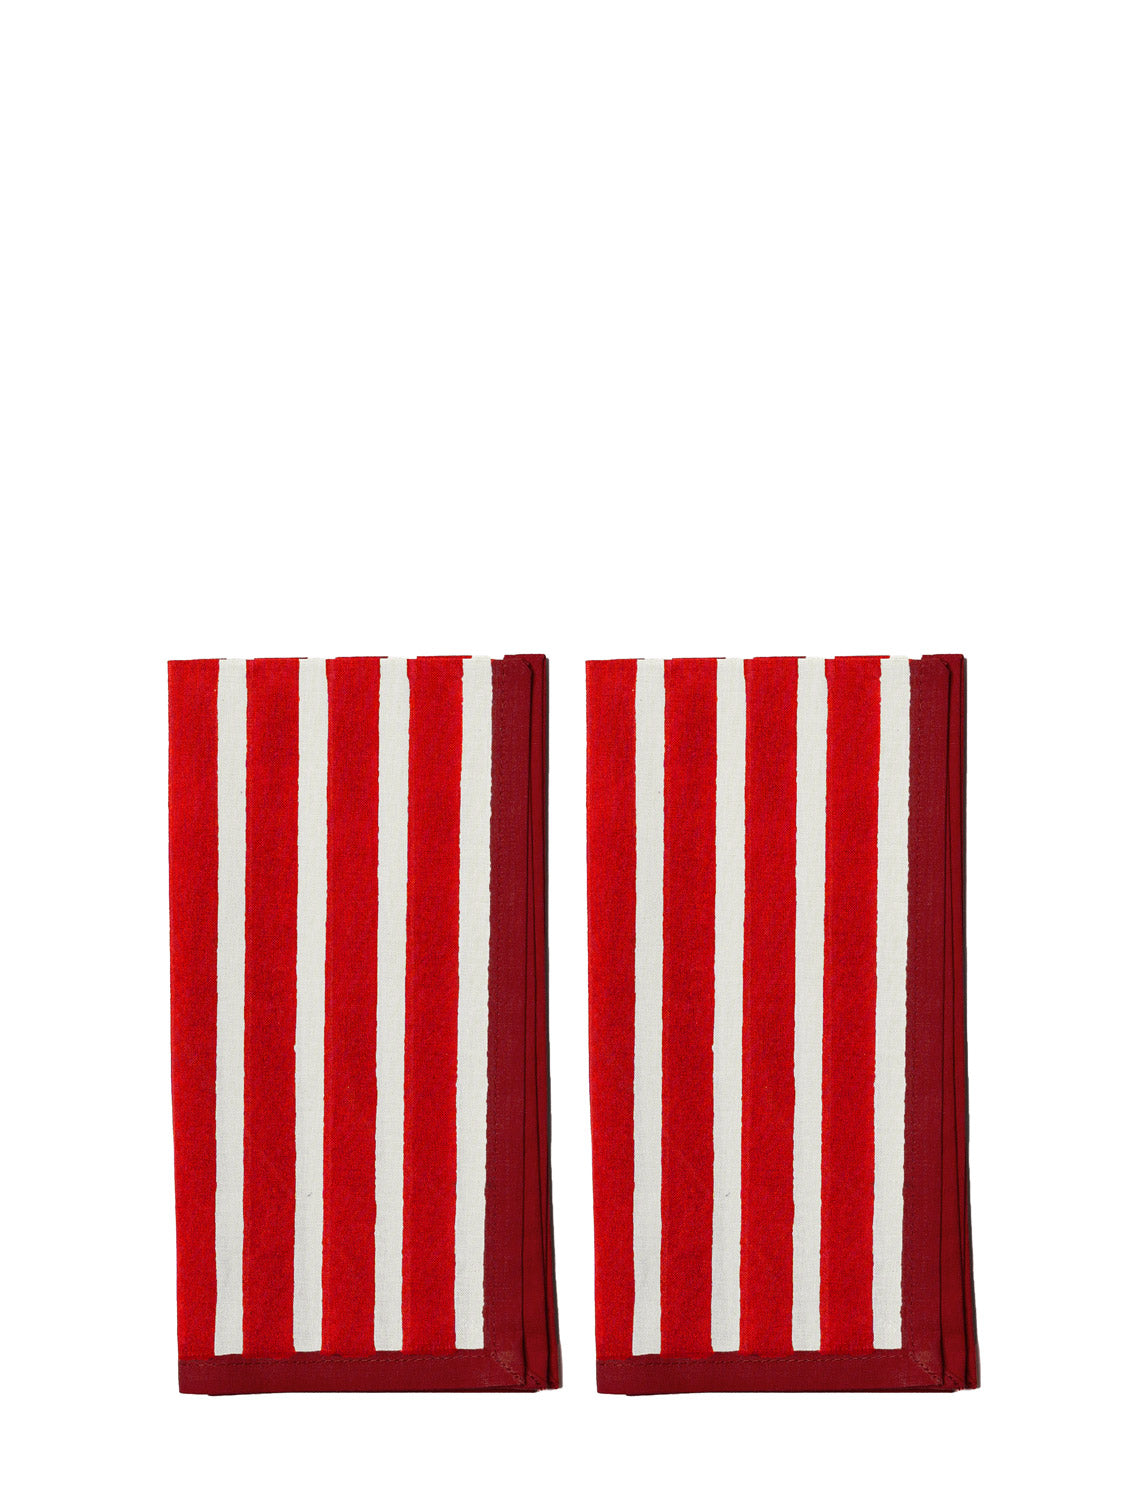 red white stripe cotton napkin set of 2 by Yod and Co